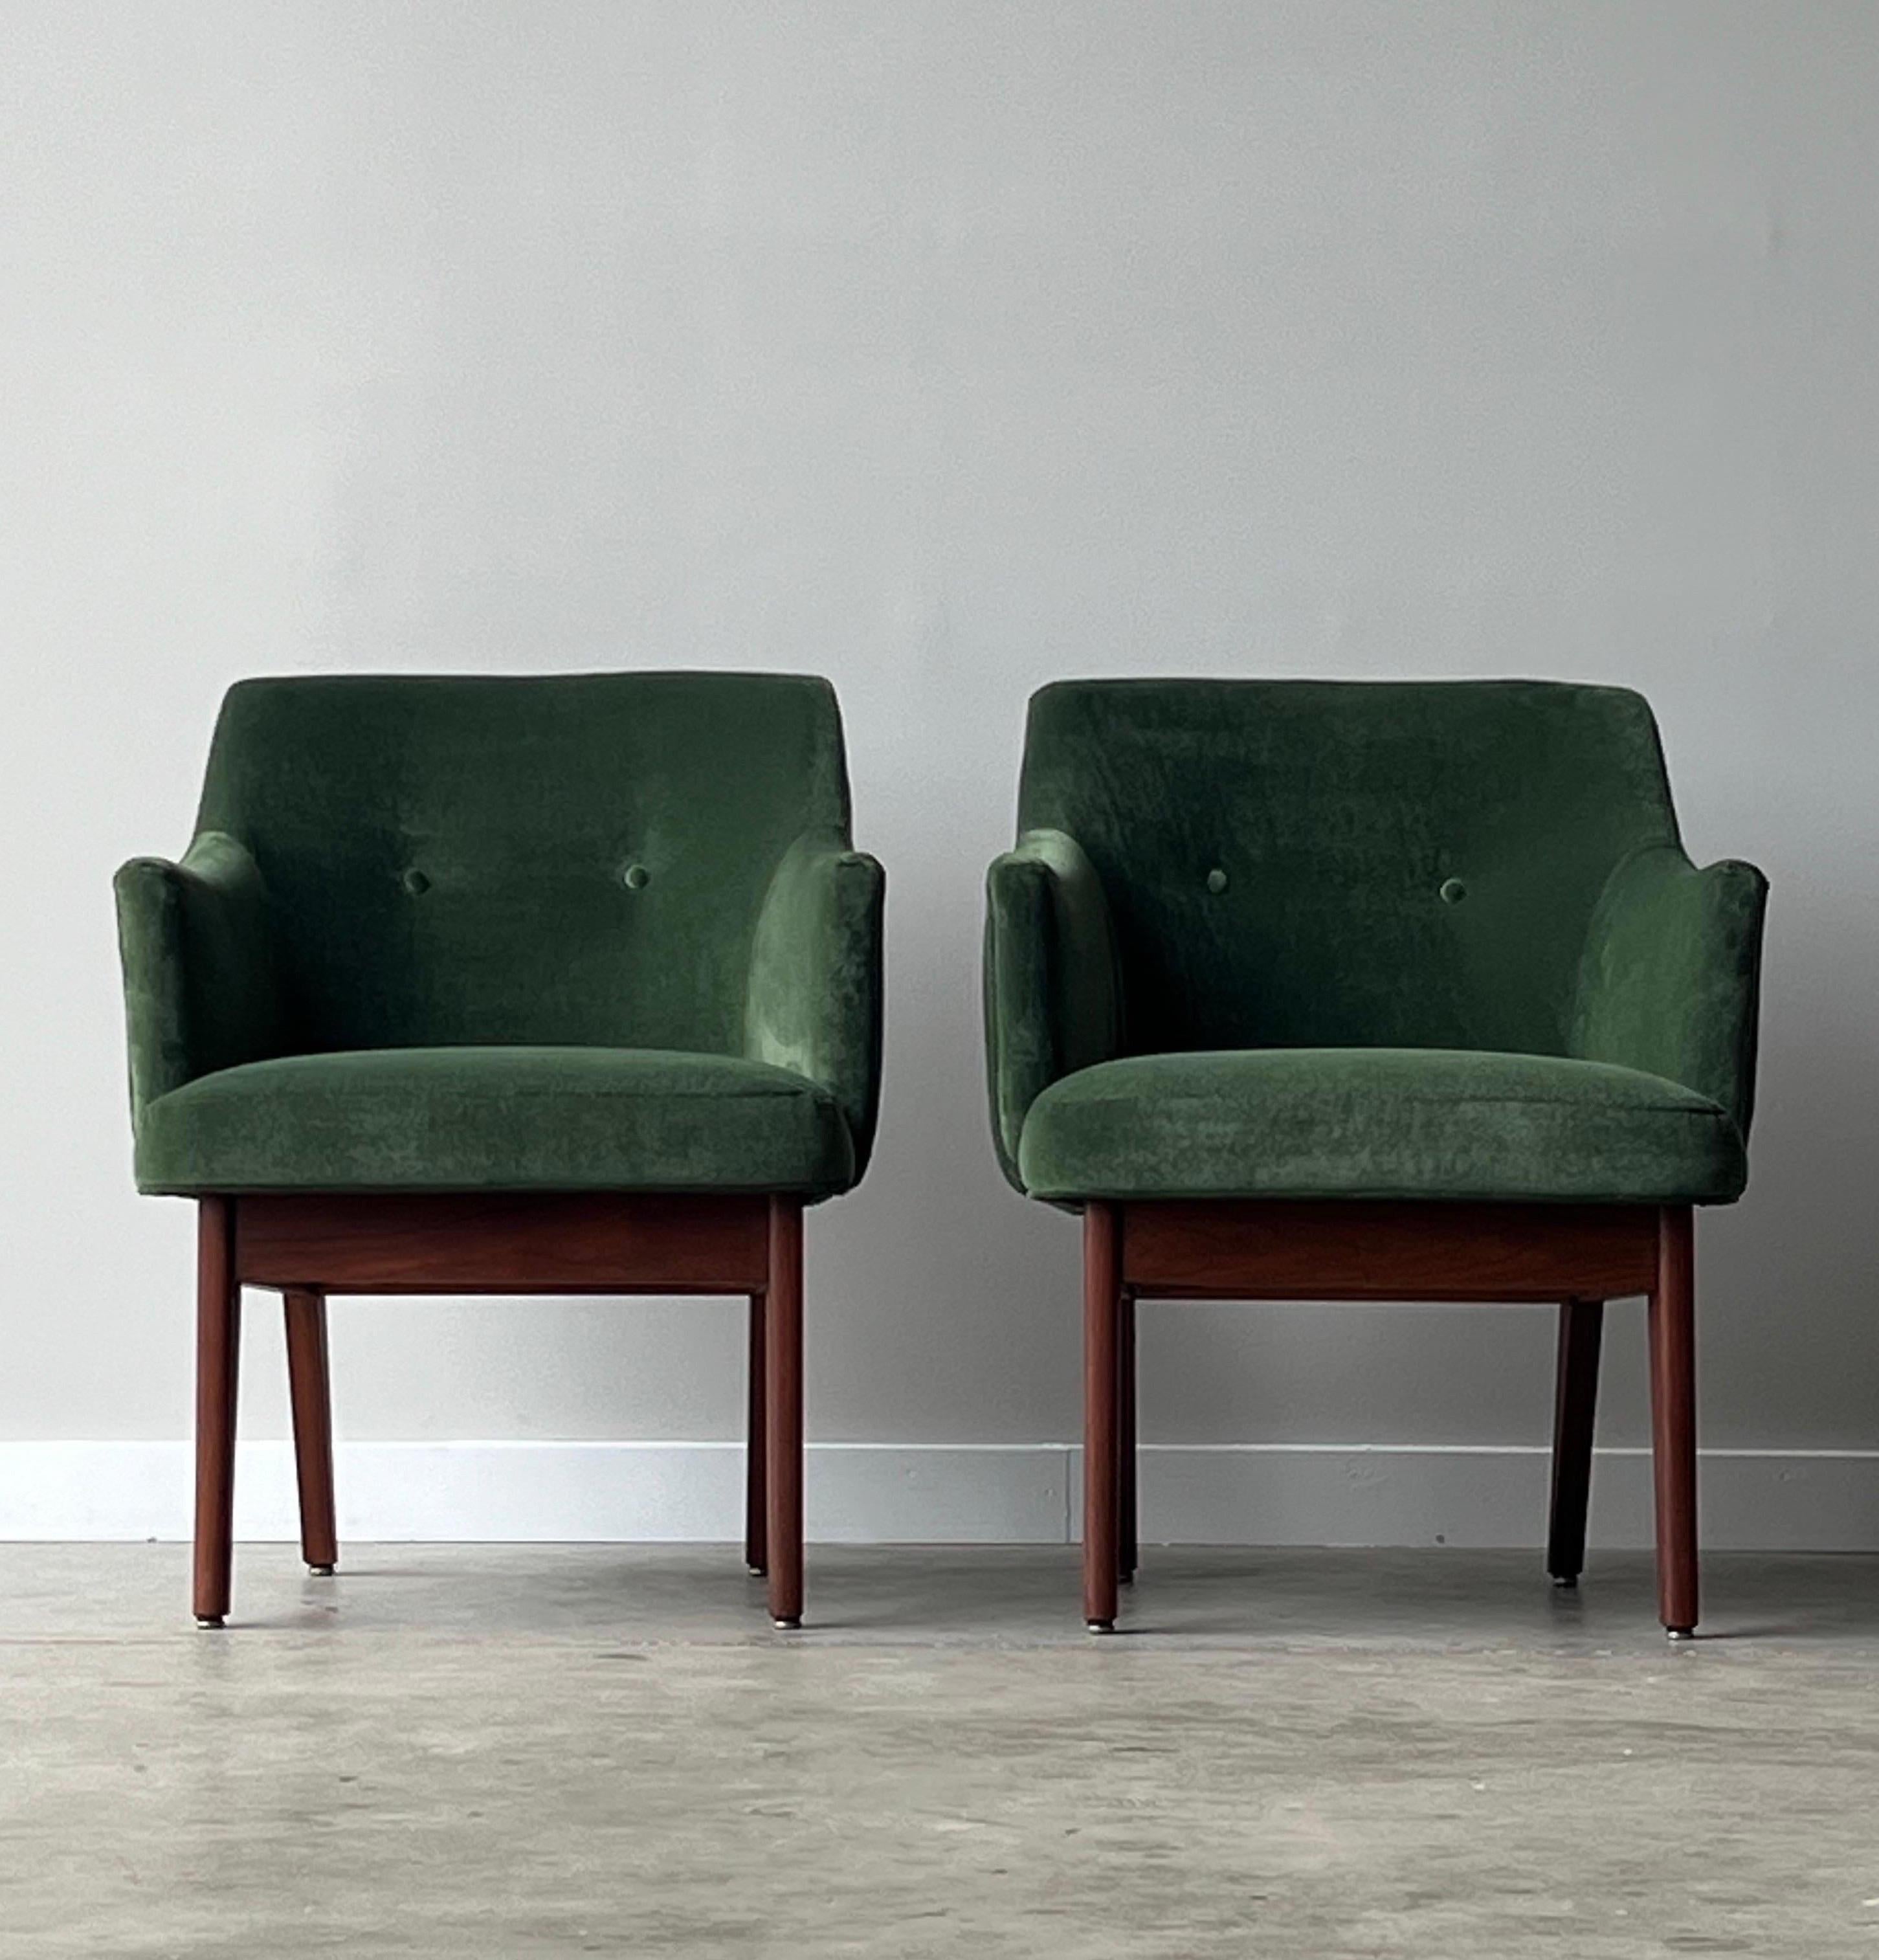 Mid-century pair of lounges in the style of Adrian Pearsall. This pair has been newly reupholstered in a forest green soft velvet fabric with two accent buttons on the backrest. They sit on a walnut base with tapered walnut legs. The back legs are